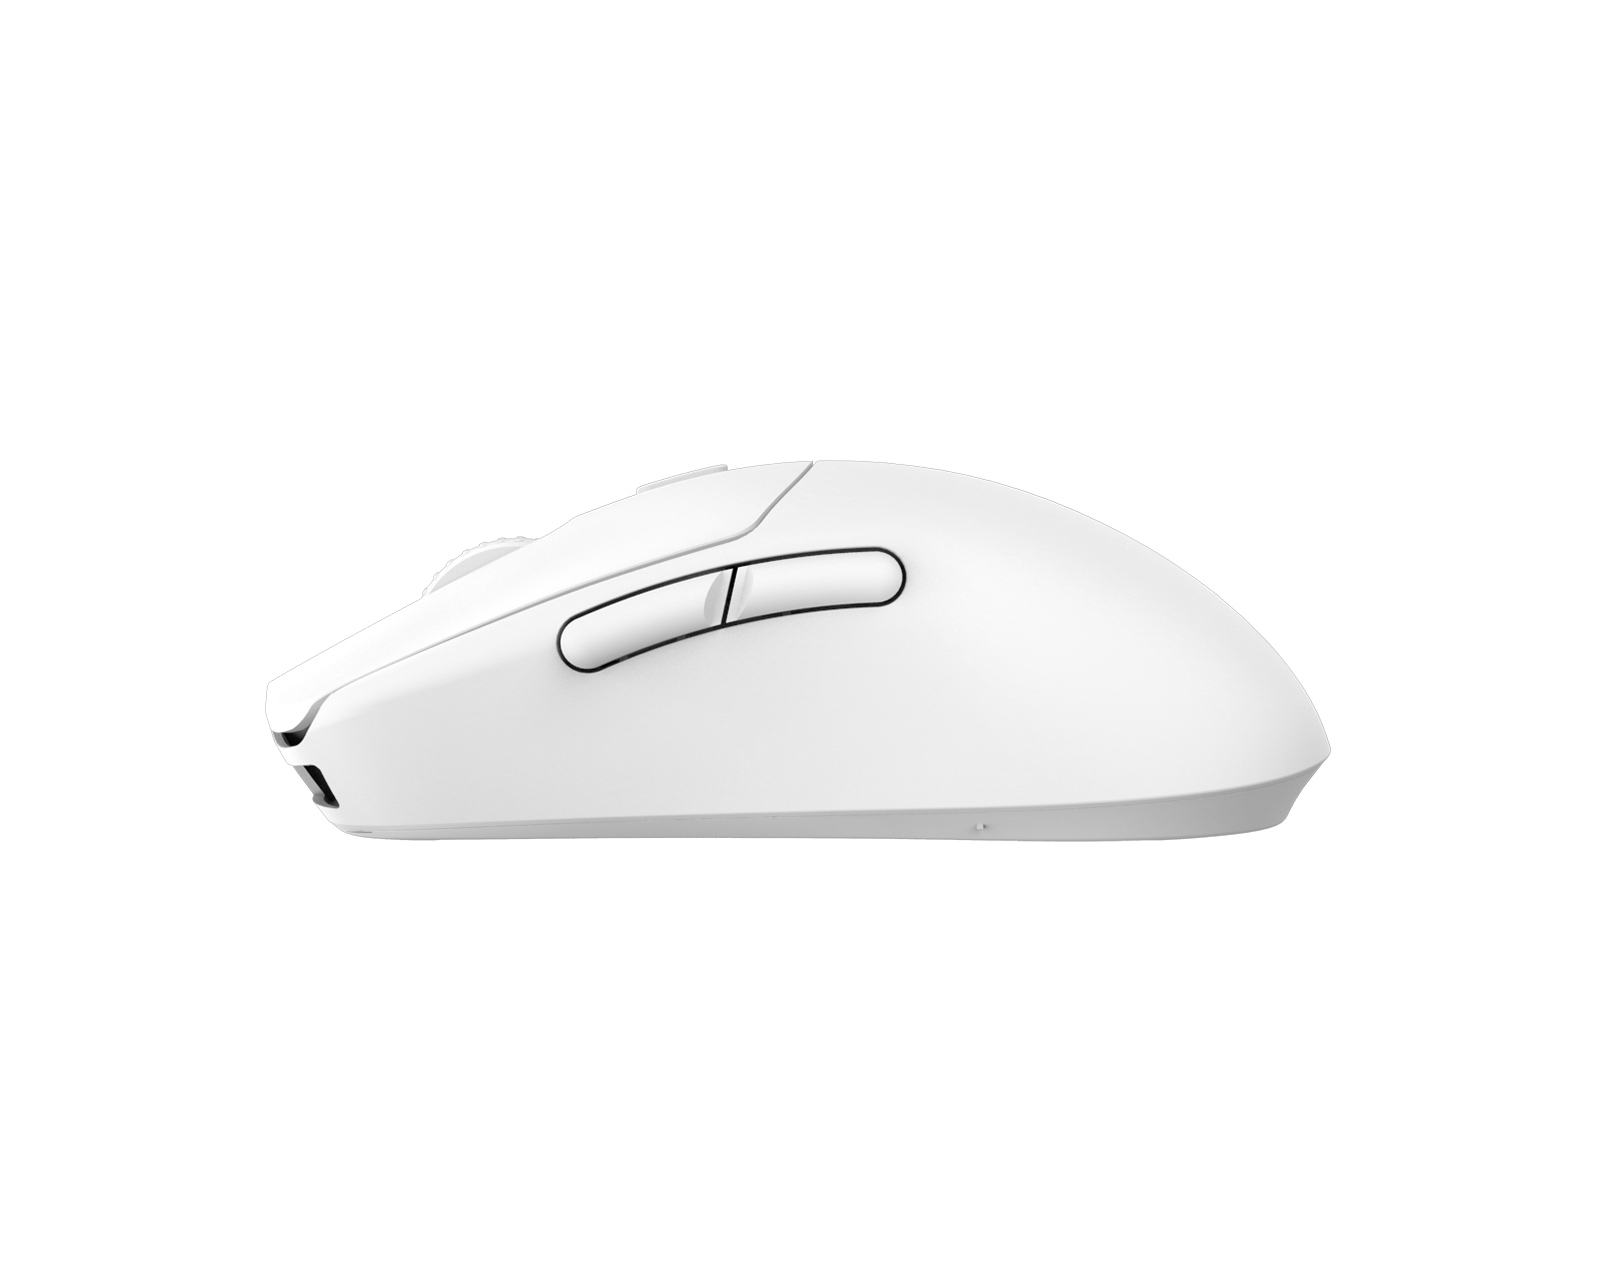 G-Wolves Hati S Plus Classic Wireless Gaming Mouse - White